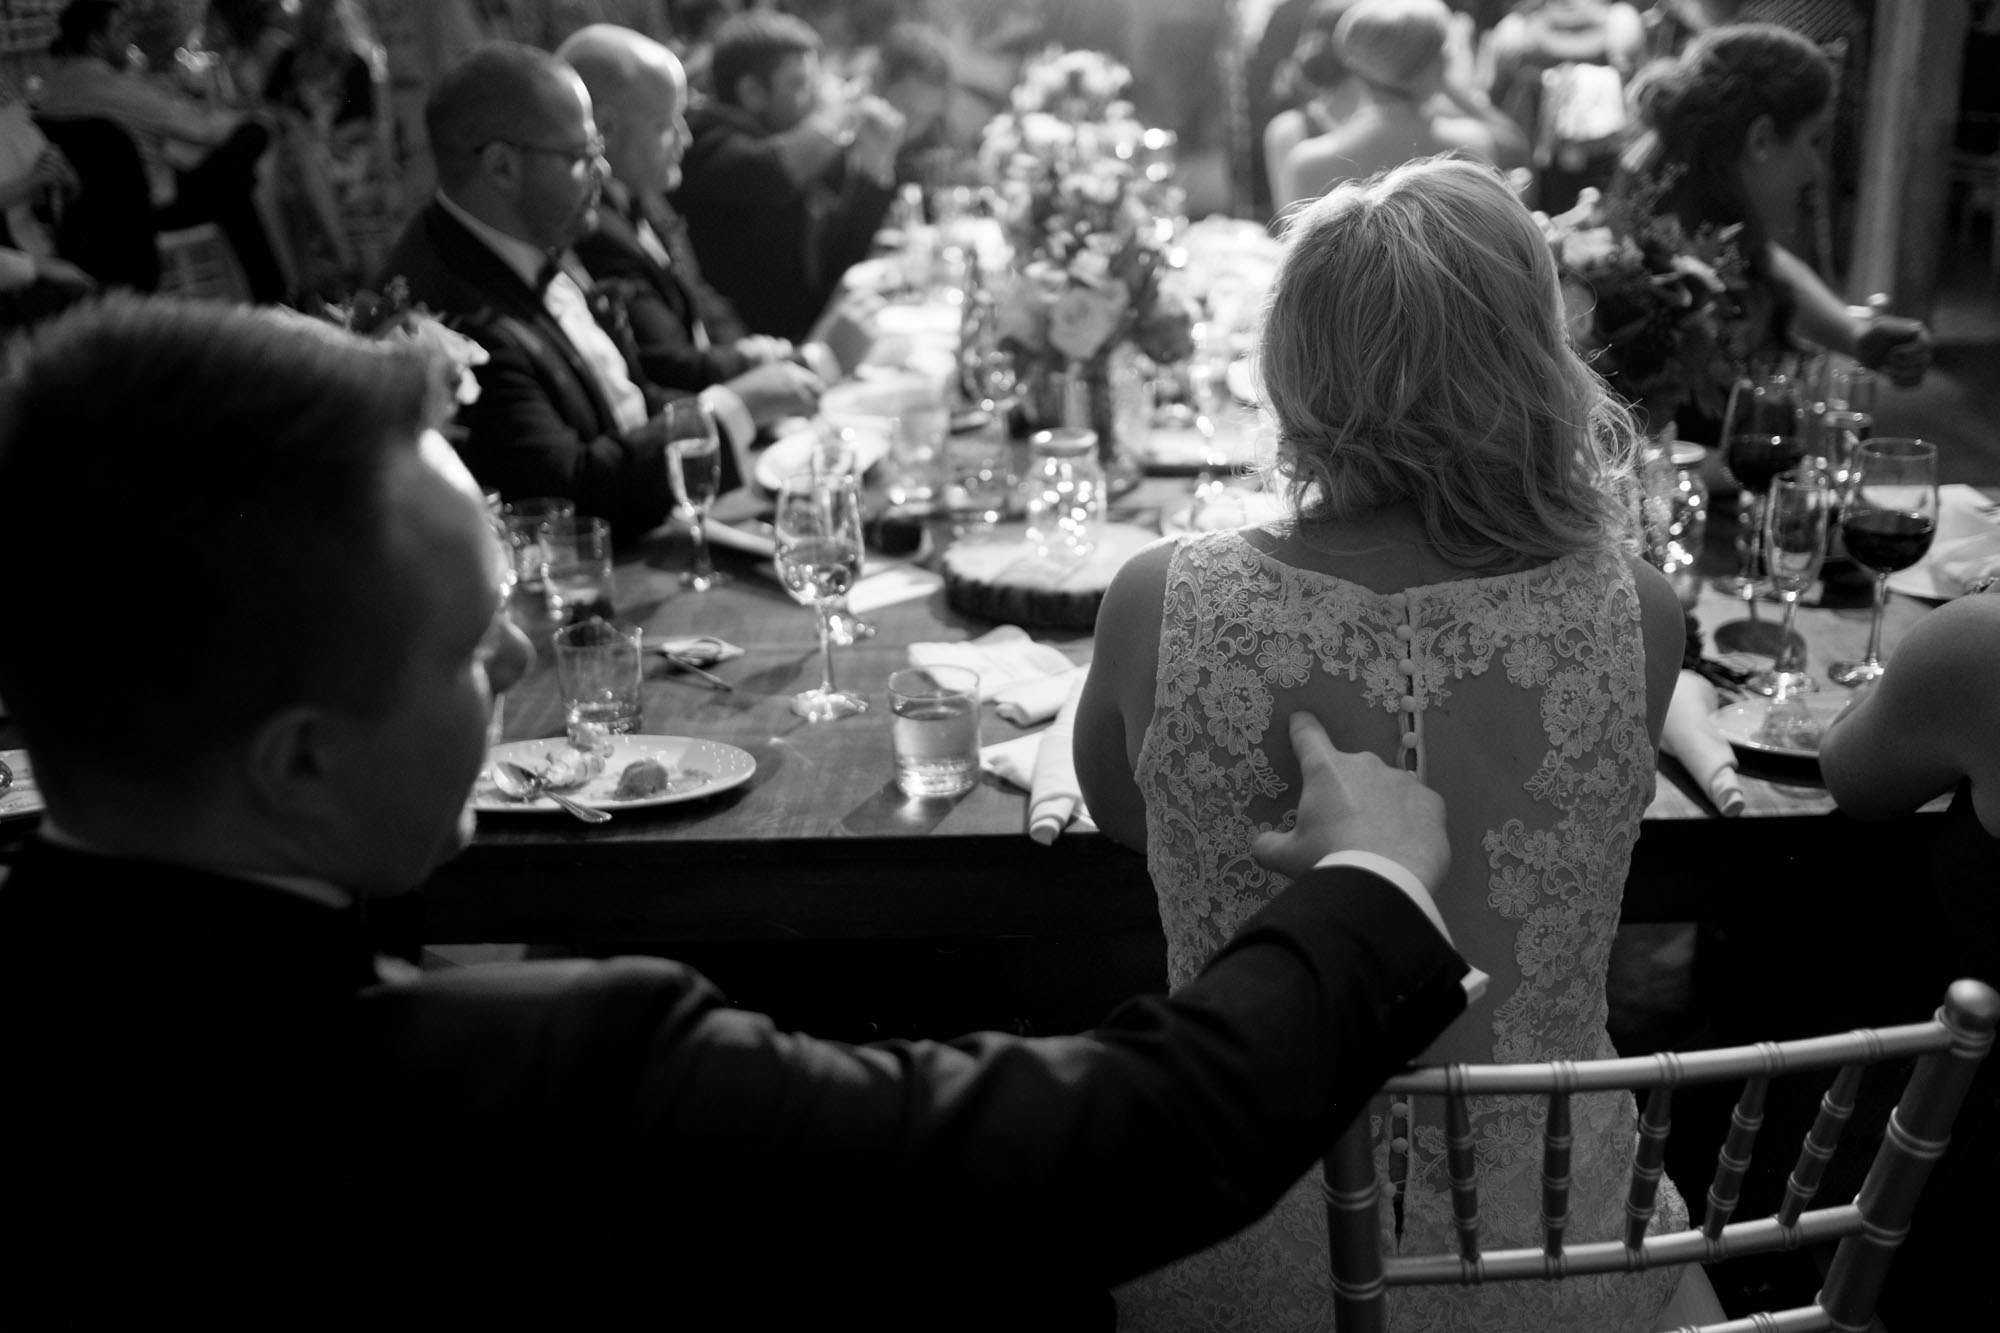  A moment during the wedding reception at the Fermenting Cellar in Toronto's Distillery District. 